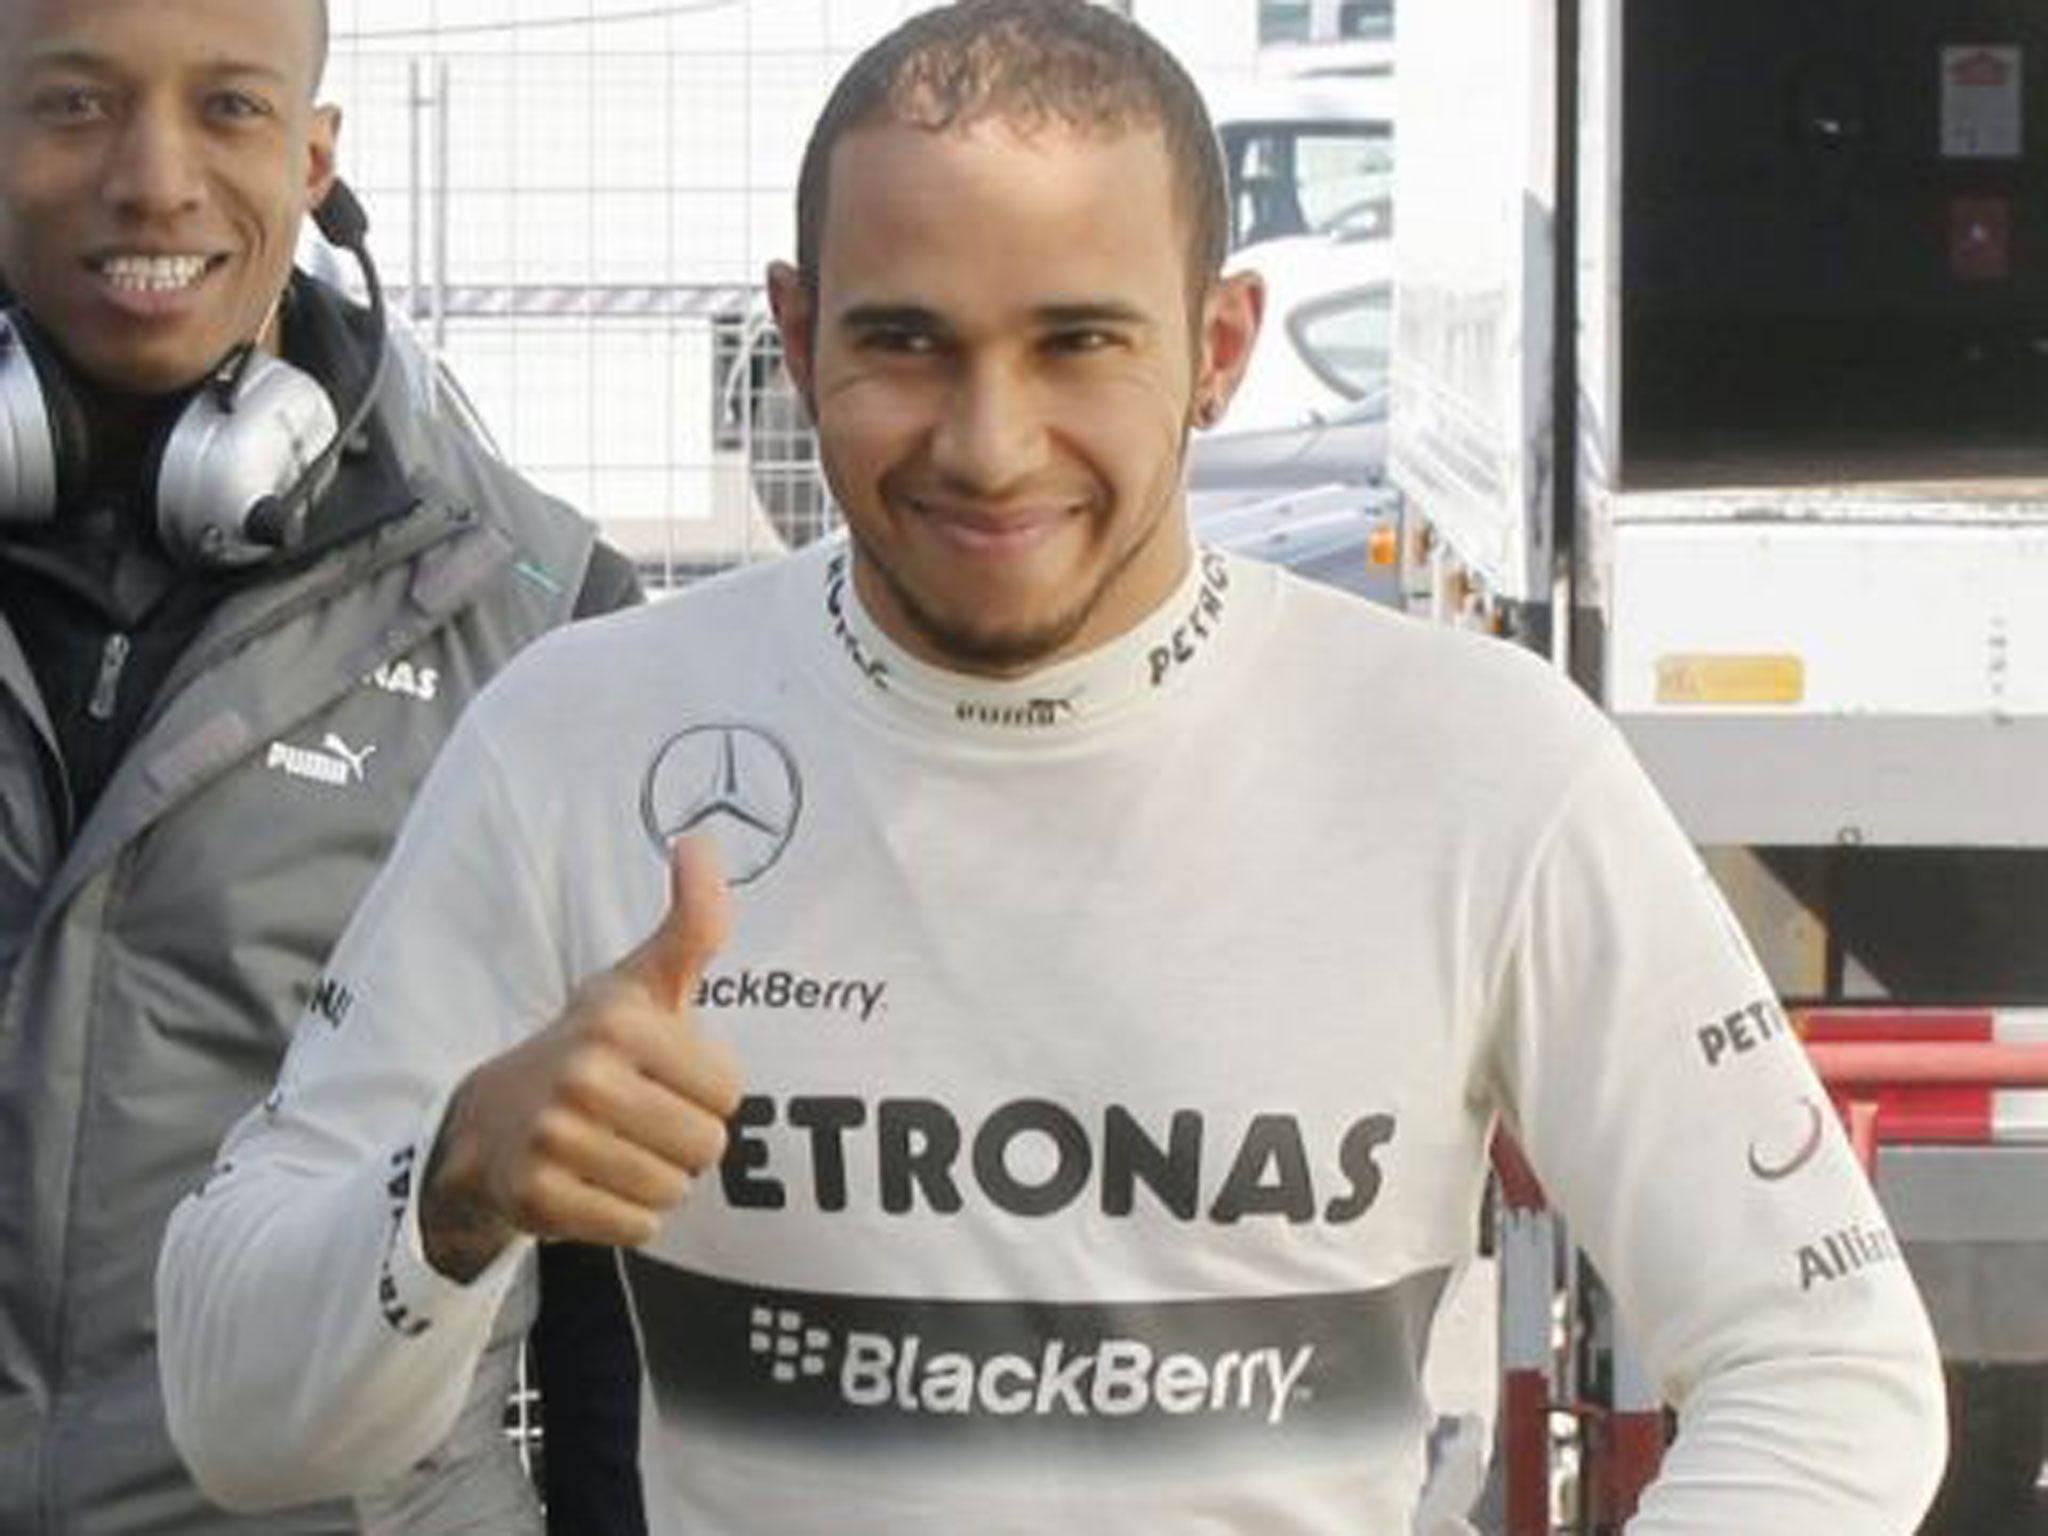 Lewis Hamilton says joining Mercedes means ‘I can spread my wings more'